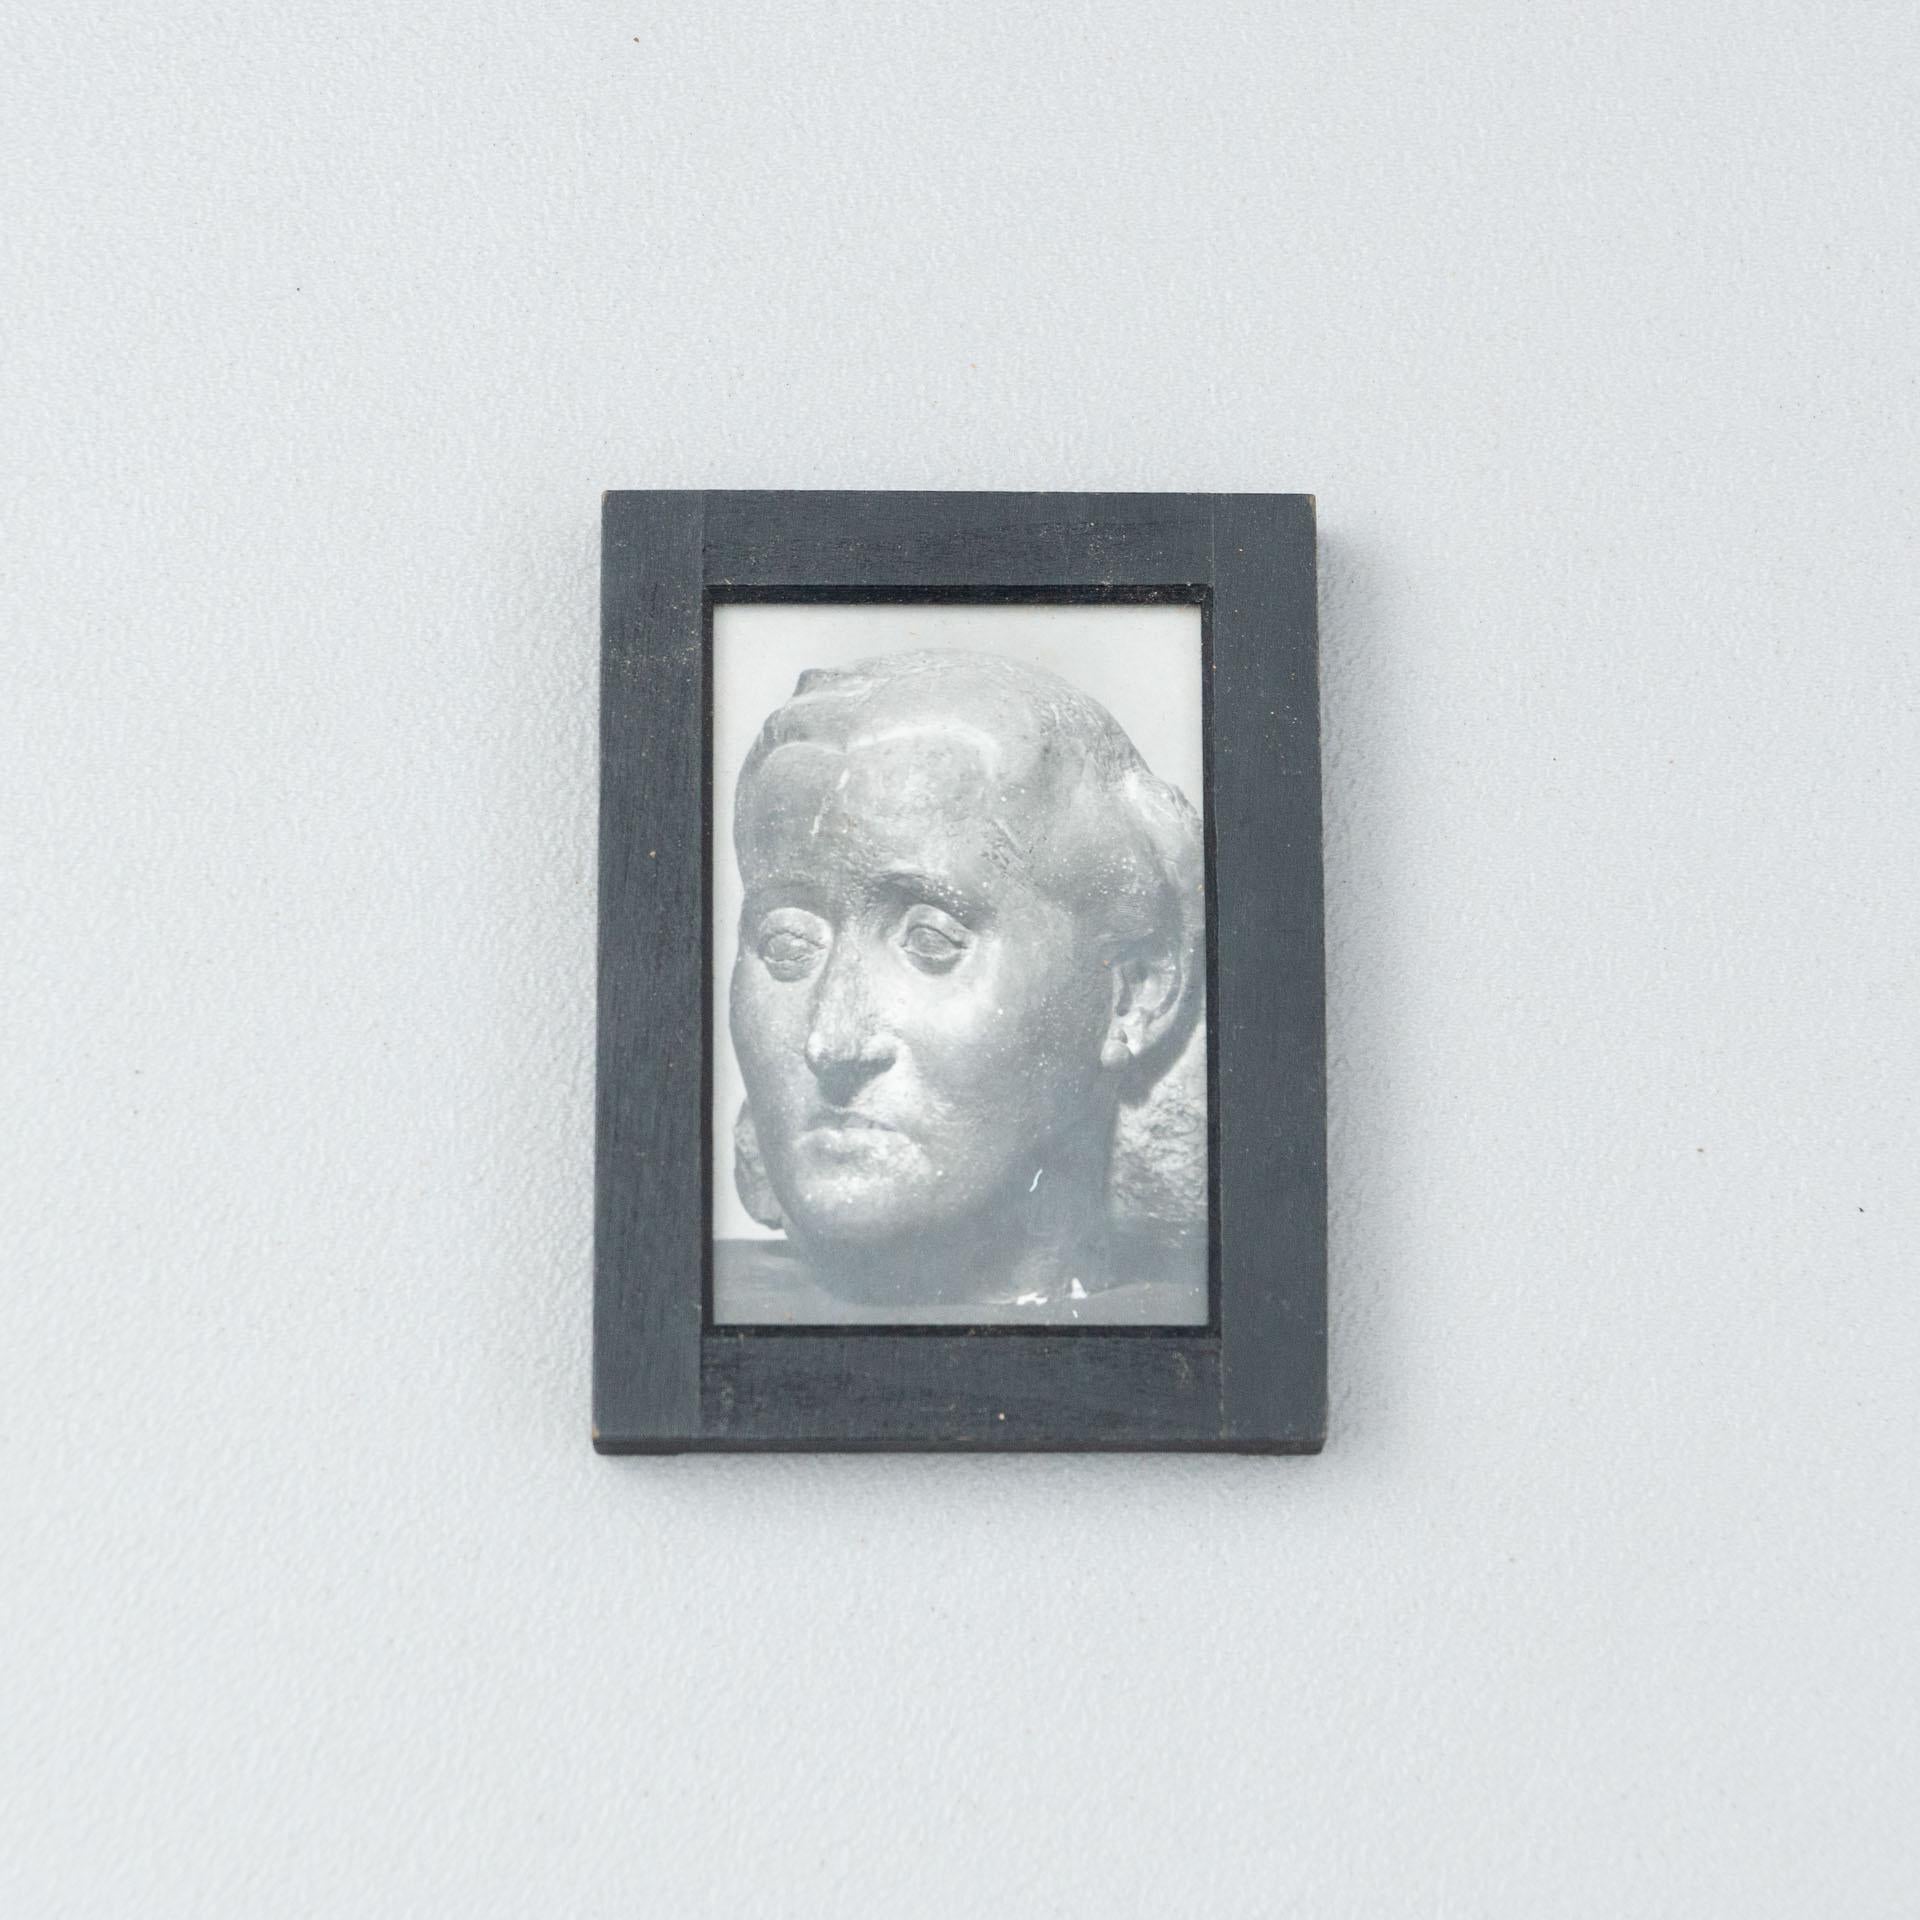 Manolo Hugué archive photography of sculpture.
Printed, circa 1960.
Wood frame included.


Materials:
Gelatin silver bromide print

Dimensions:
D 1 cm x W 7.6 cm x H 10.1 cm

We offer free worldwide shipping for this piece.